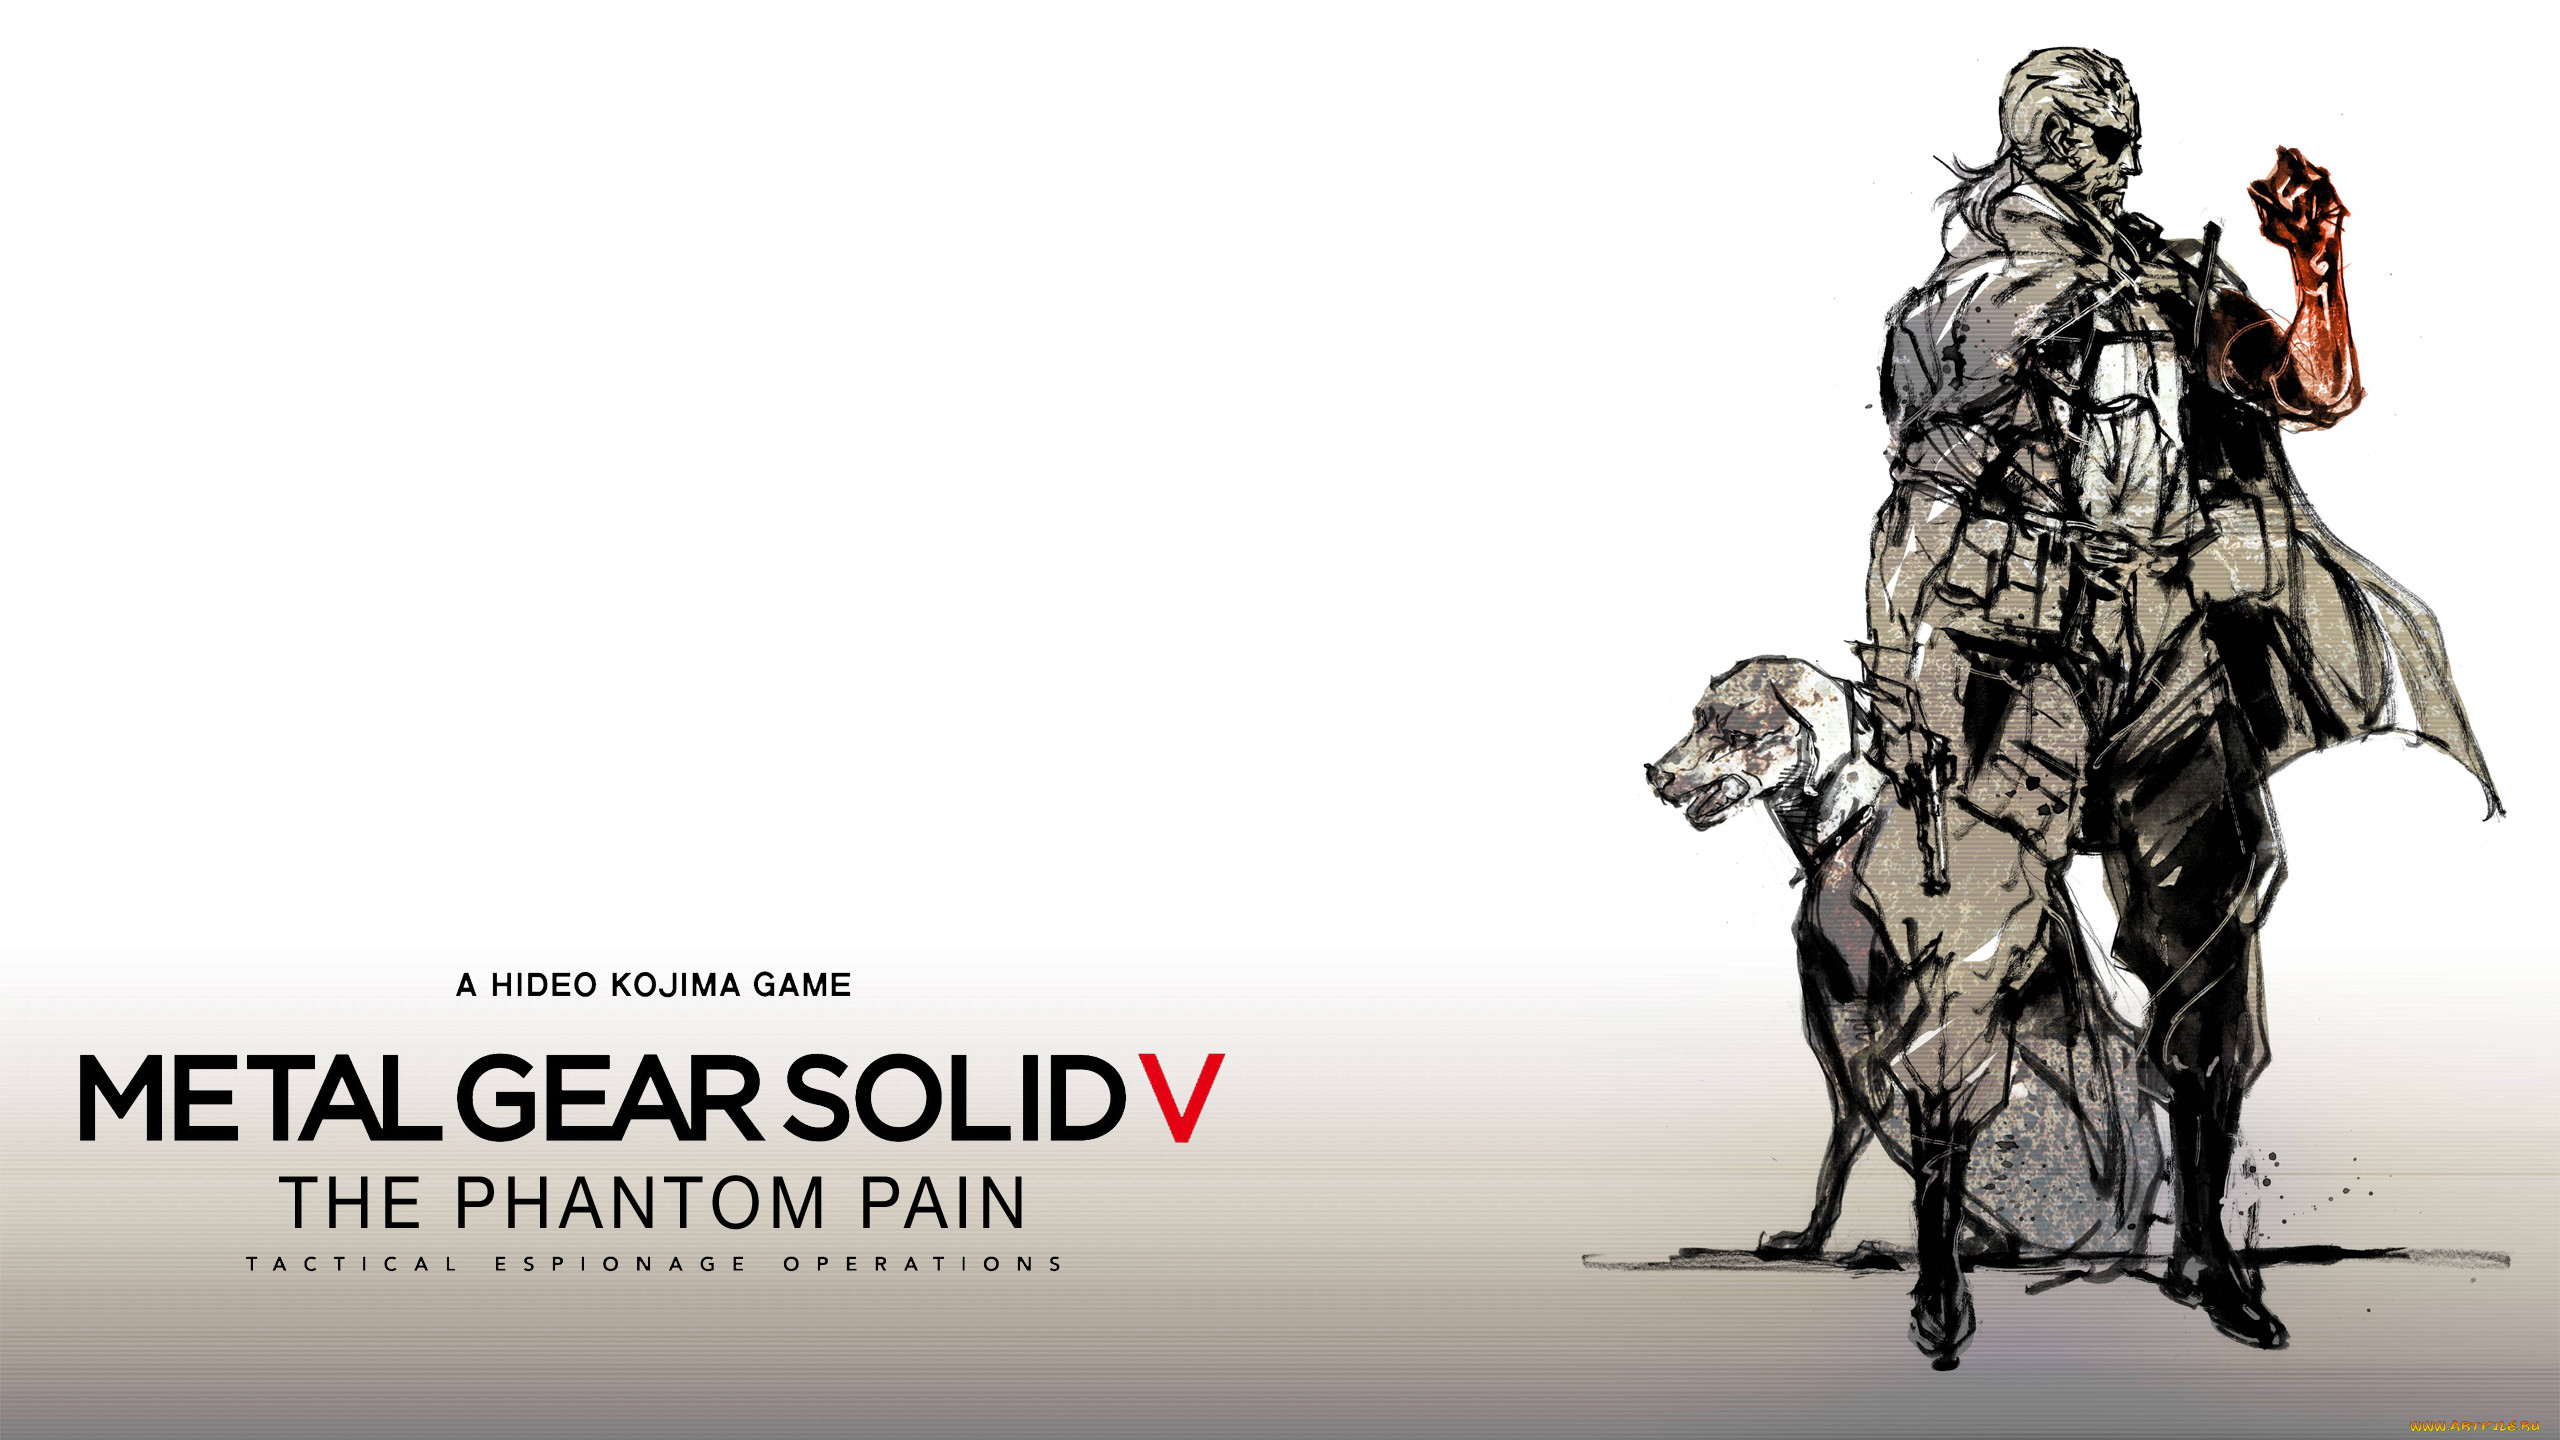  , metal gear solid v,  the phantom pain, , , action, the, phantom, pain, metal, gear, solid, v